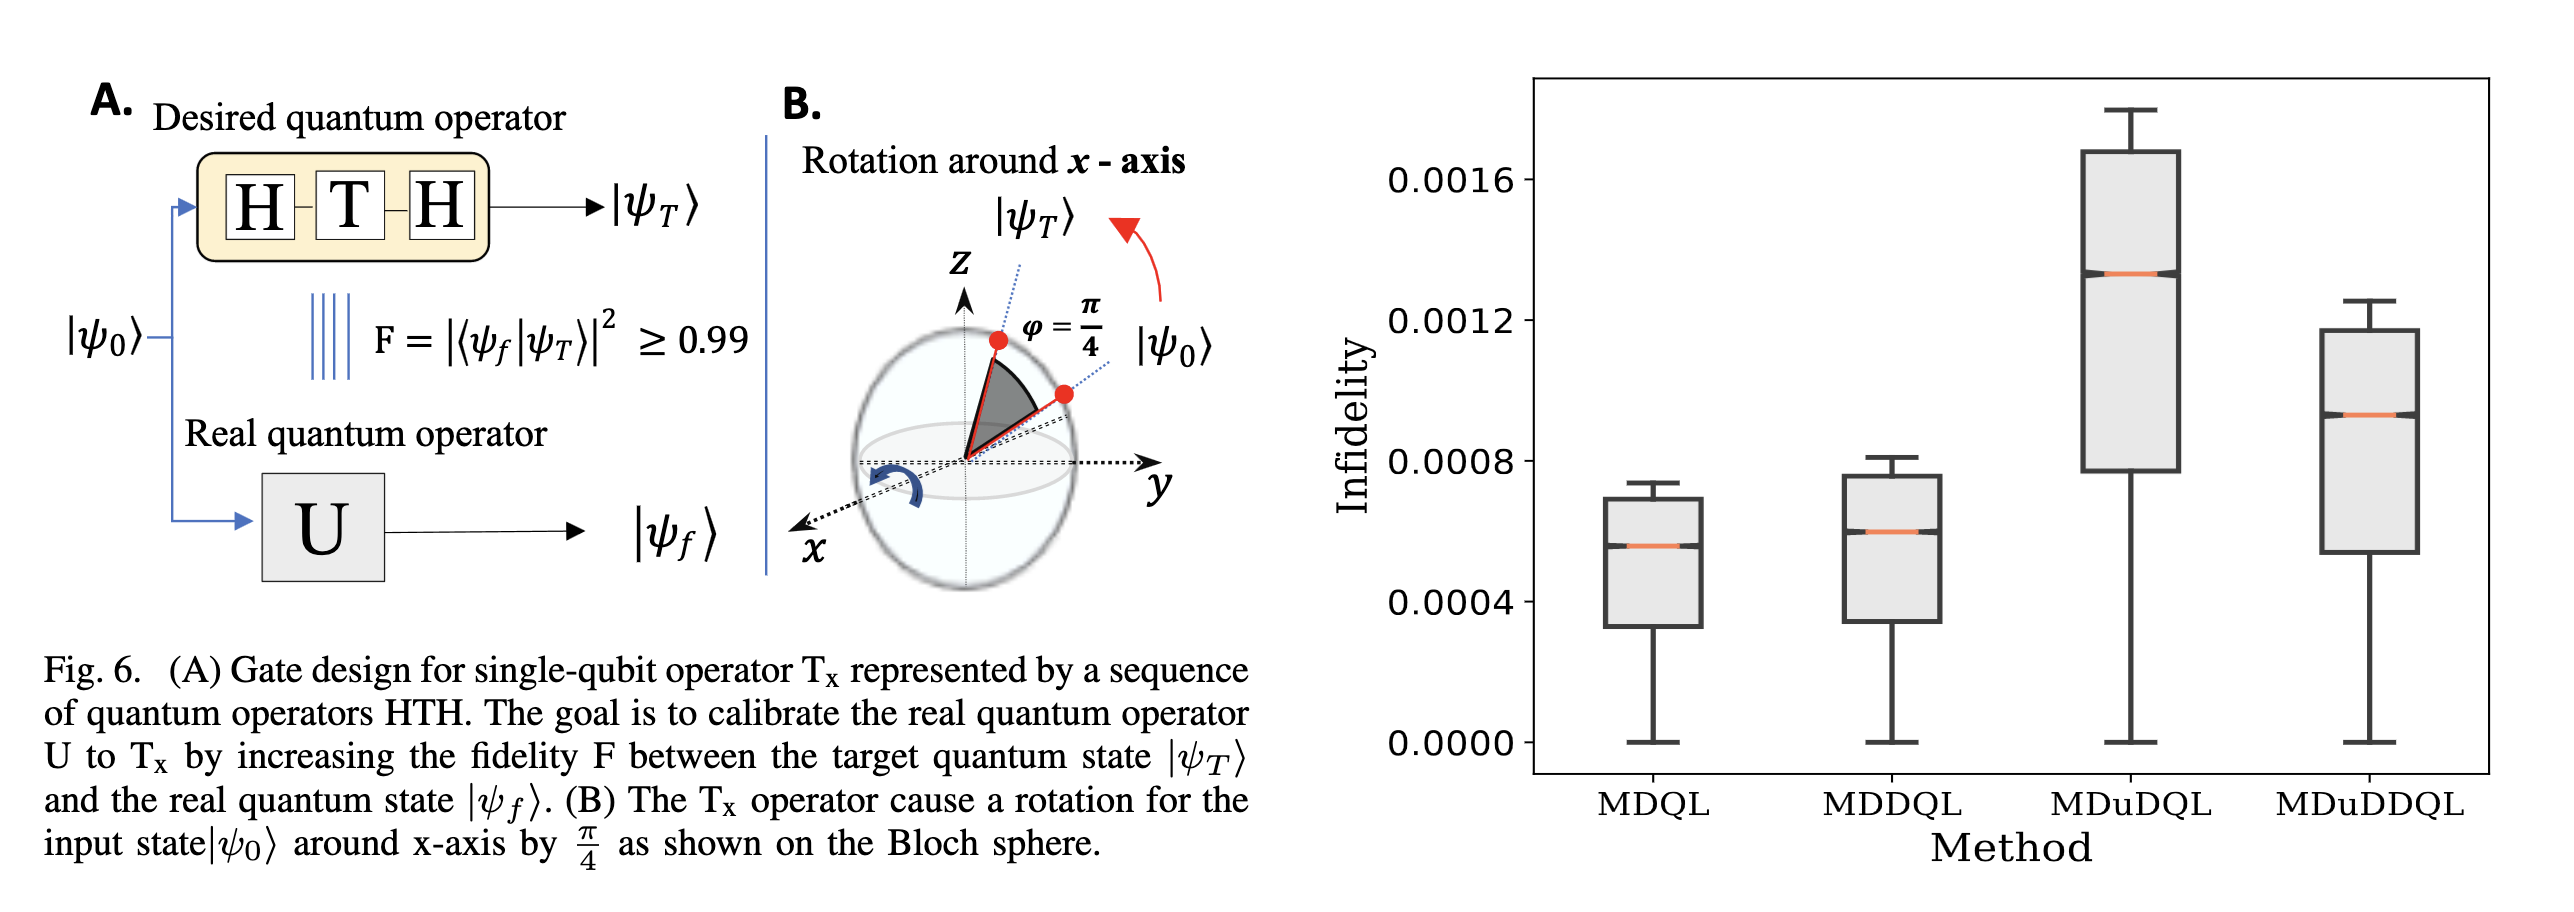 Model-free Quantum Gate Design and Calibration using Deep Reinforcement
  Learning